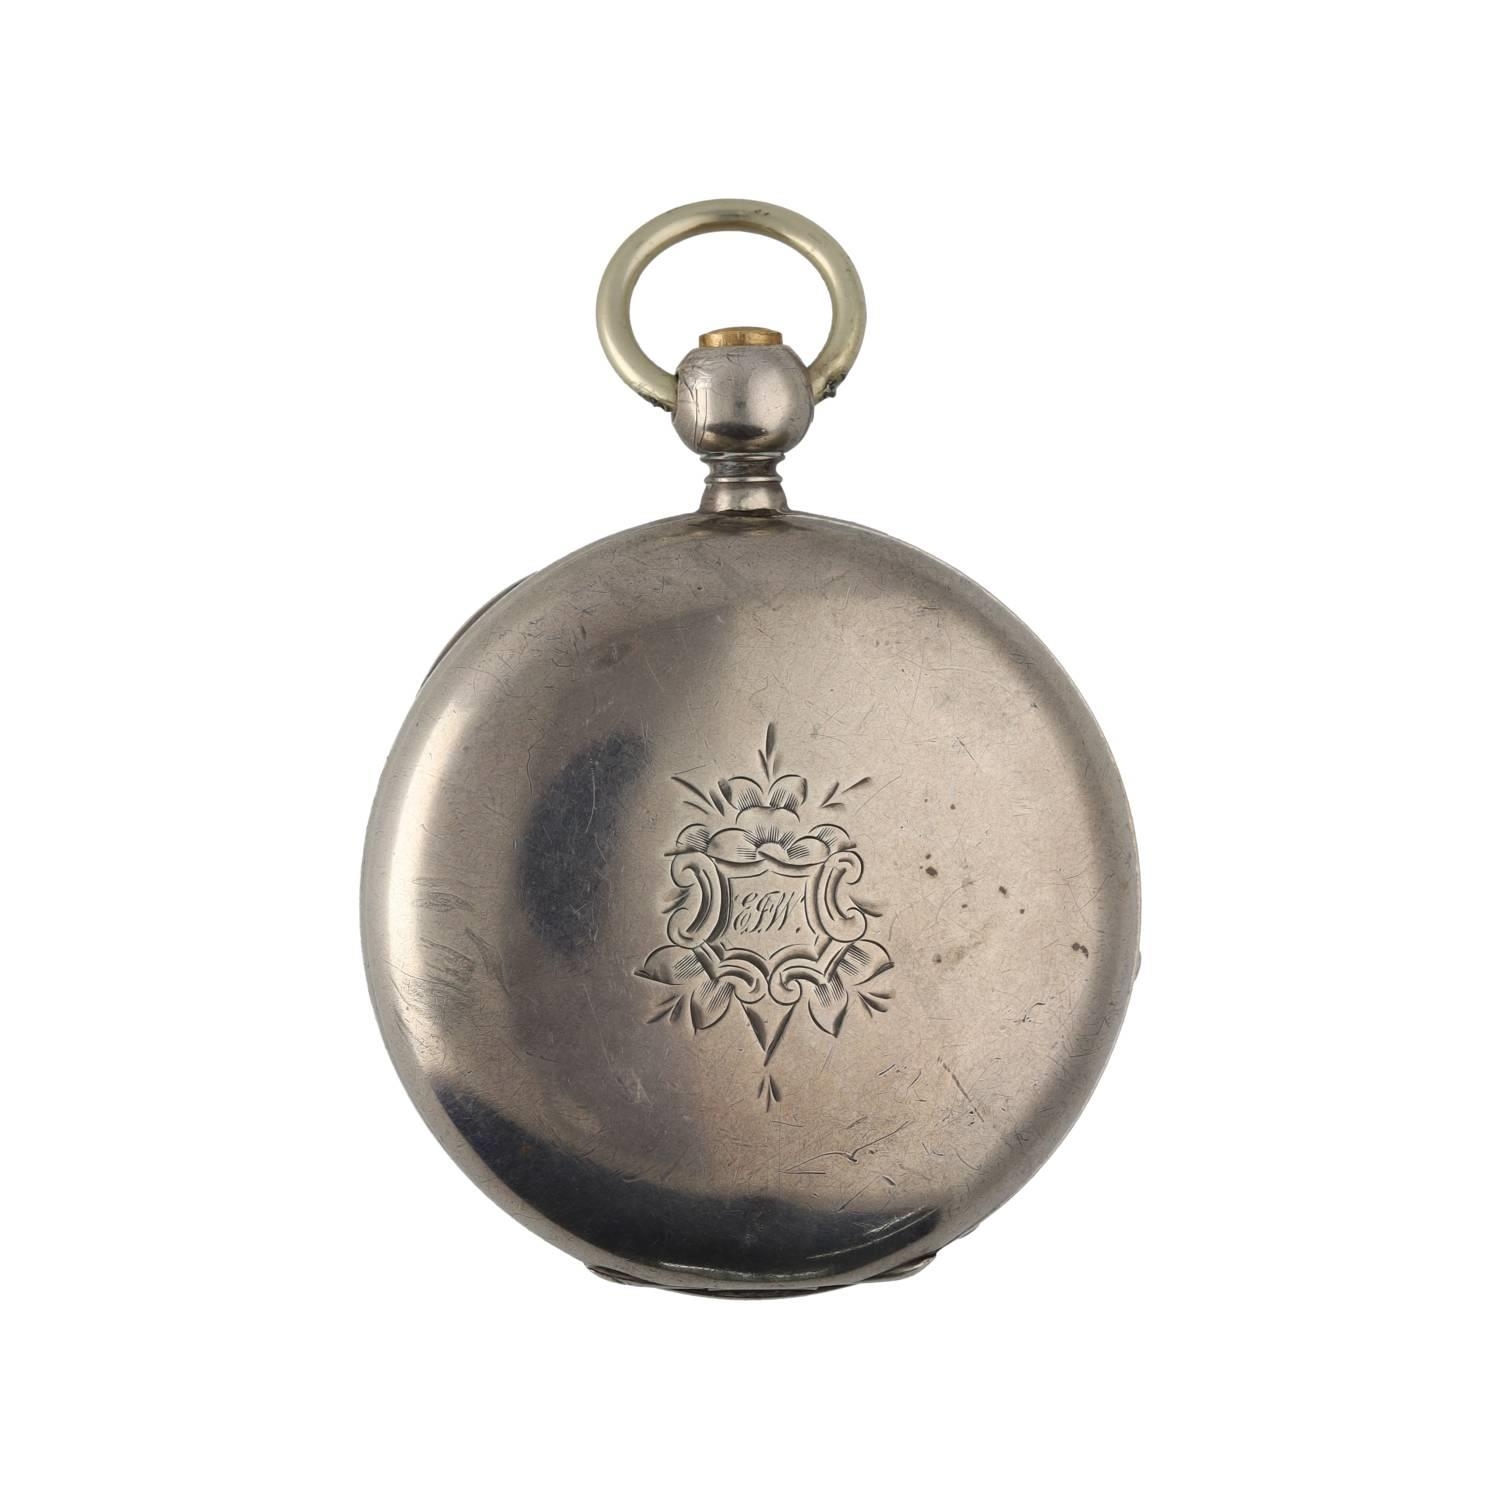 Early American Waltham 'P.S. Bartlett' lever hunter pocket watch, circa 1864, serial no. 148734, - Image 3 of 4